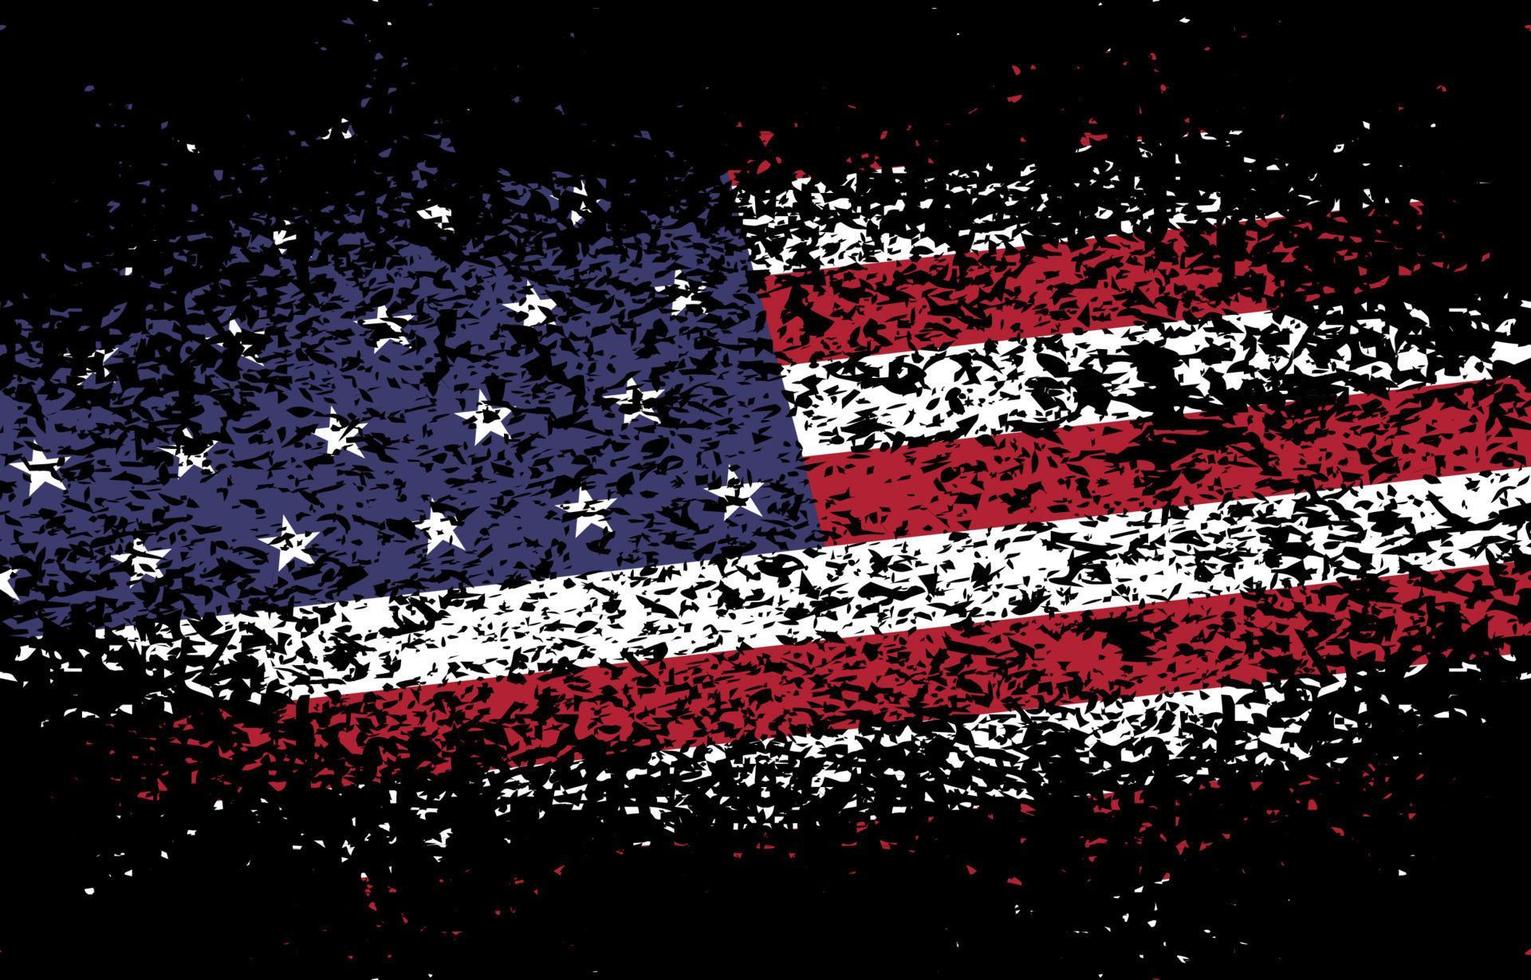 Distressed American Flag in Black Background vector